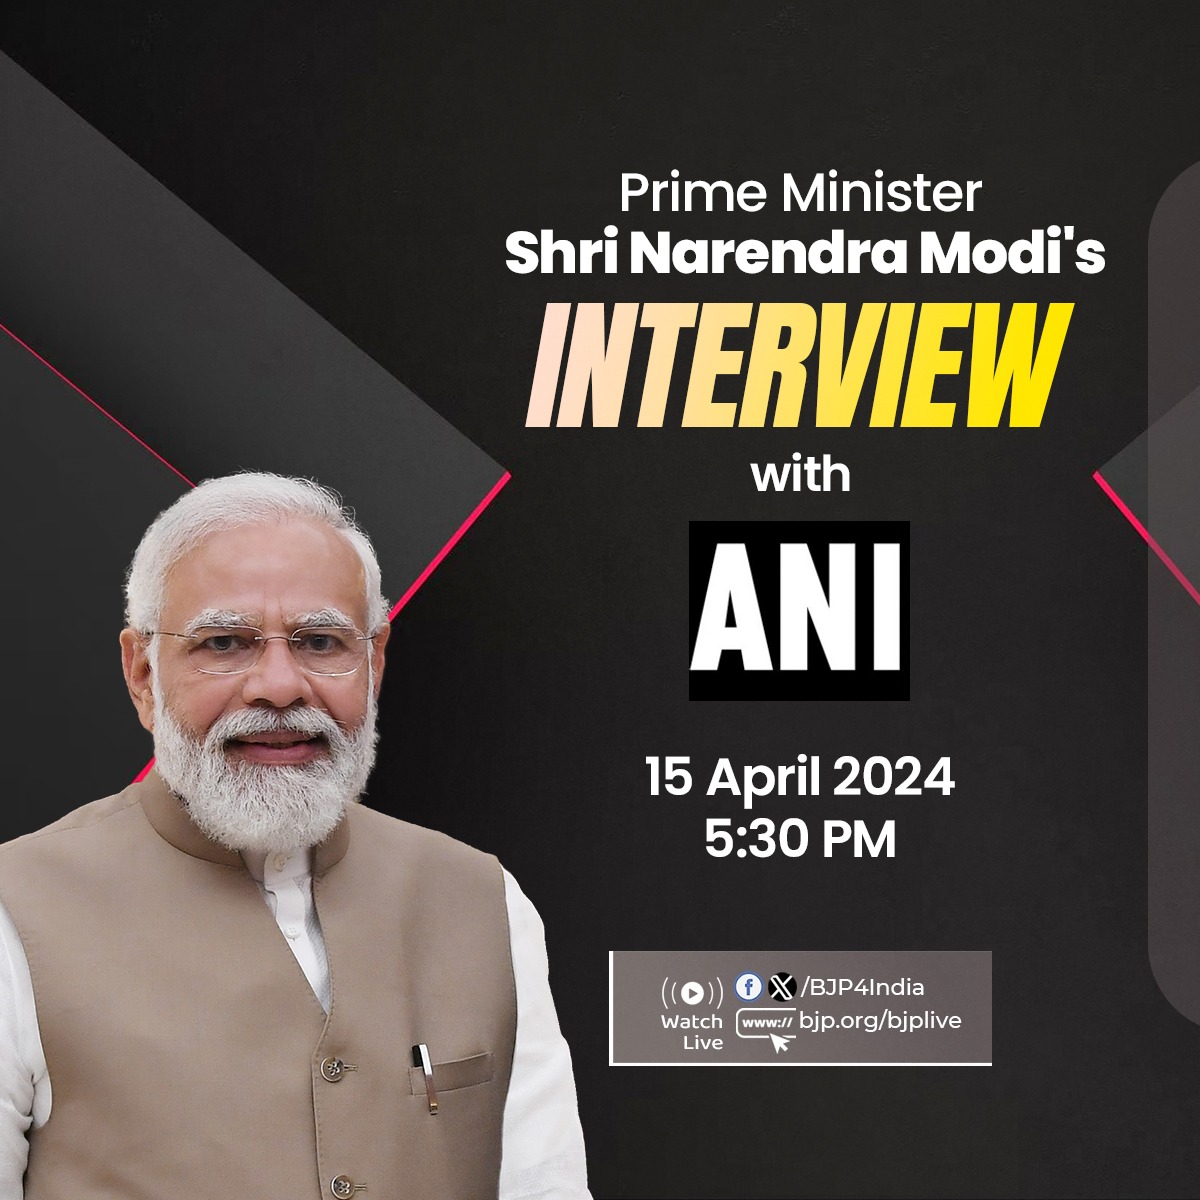 Prime Minister Shri @narendramodi's interview with Asian News International (ANI) will air today at 5:30 PM. Stay tuned! Watch live: 📺twitter.com/BJP4India 📺facebook.com/BJP4India 📺youtube.com/BJP4India 📺bjp.org/bjplive